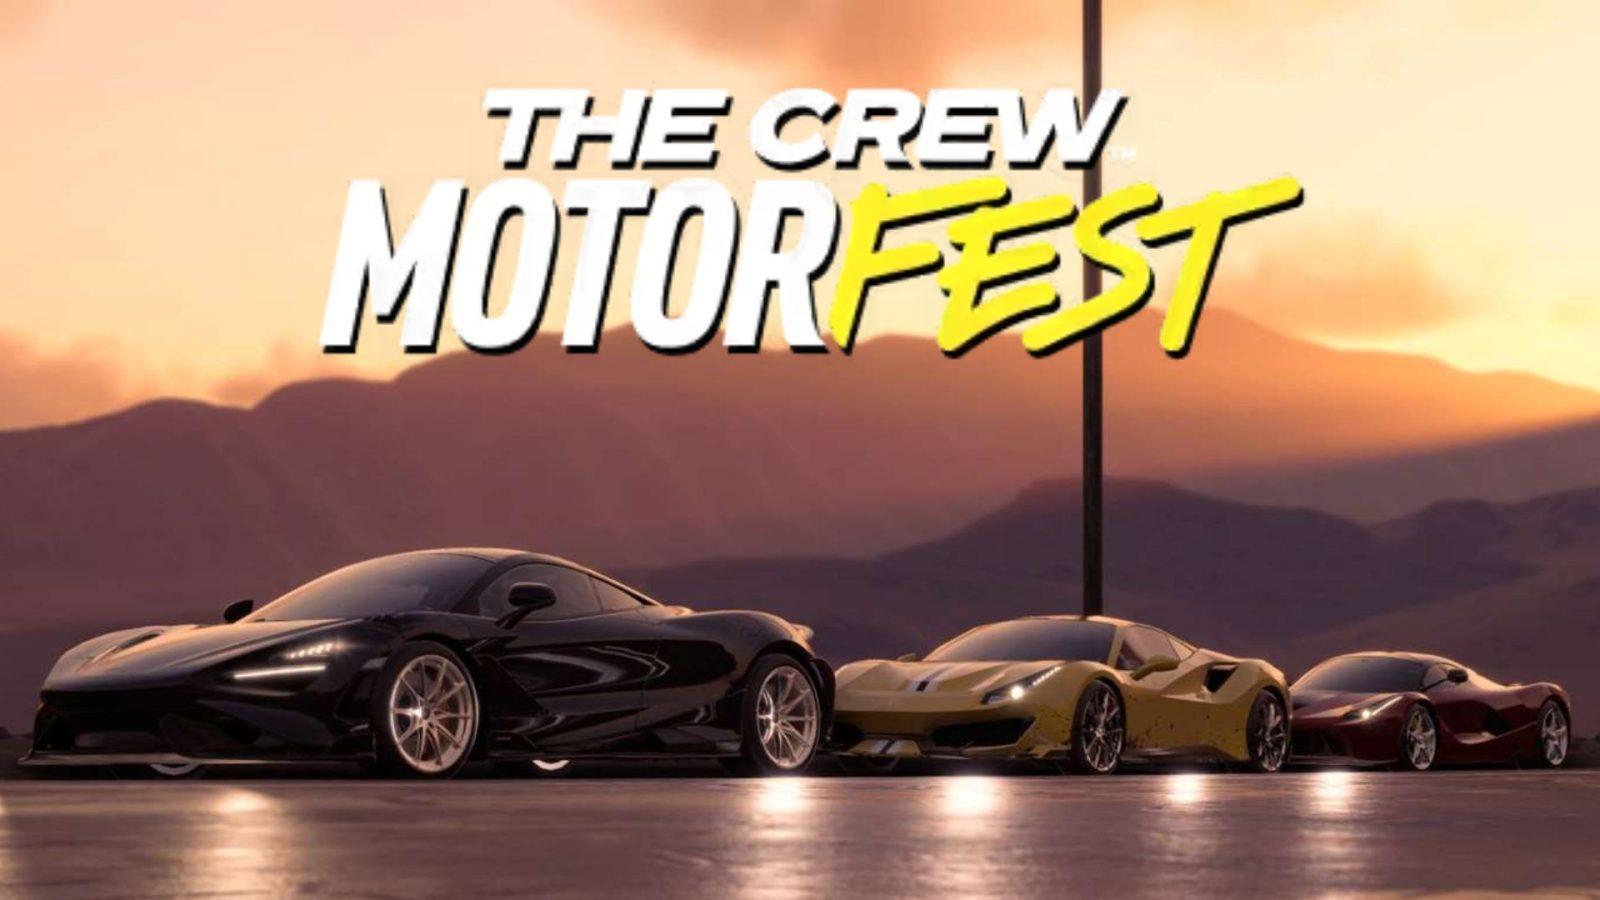  For all your gaming needs - The Crew Motorfest